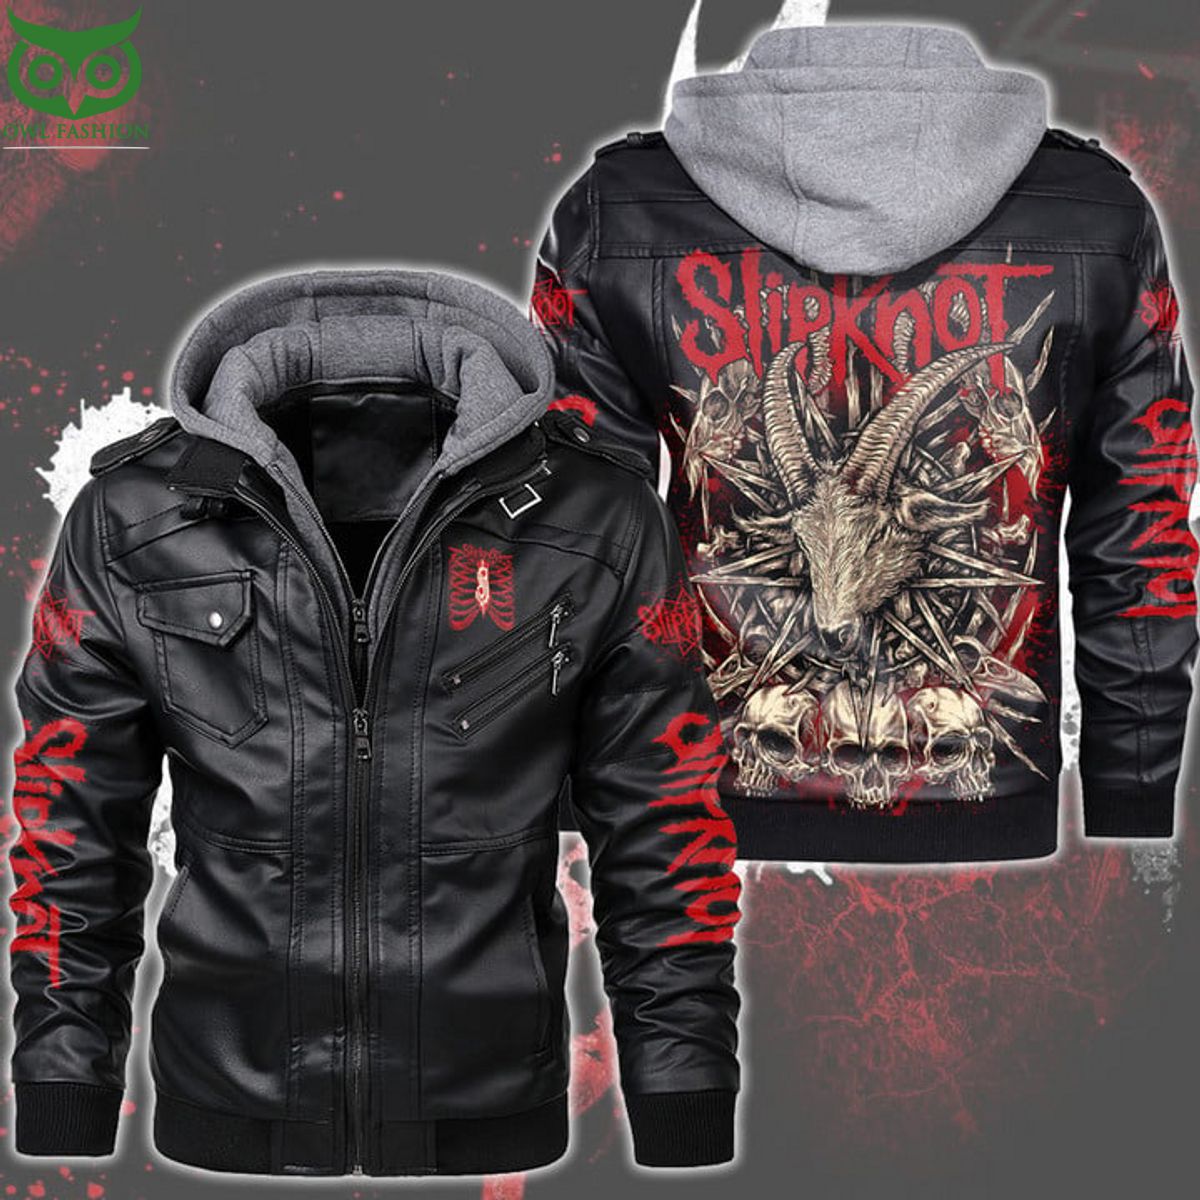 Hot Slipknot Music Rock Band leather jacket You look so healthy and fit